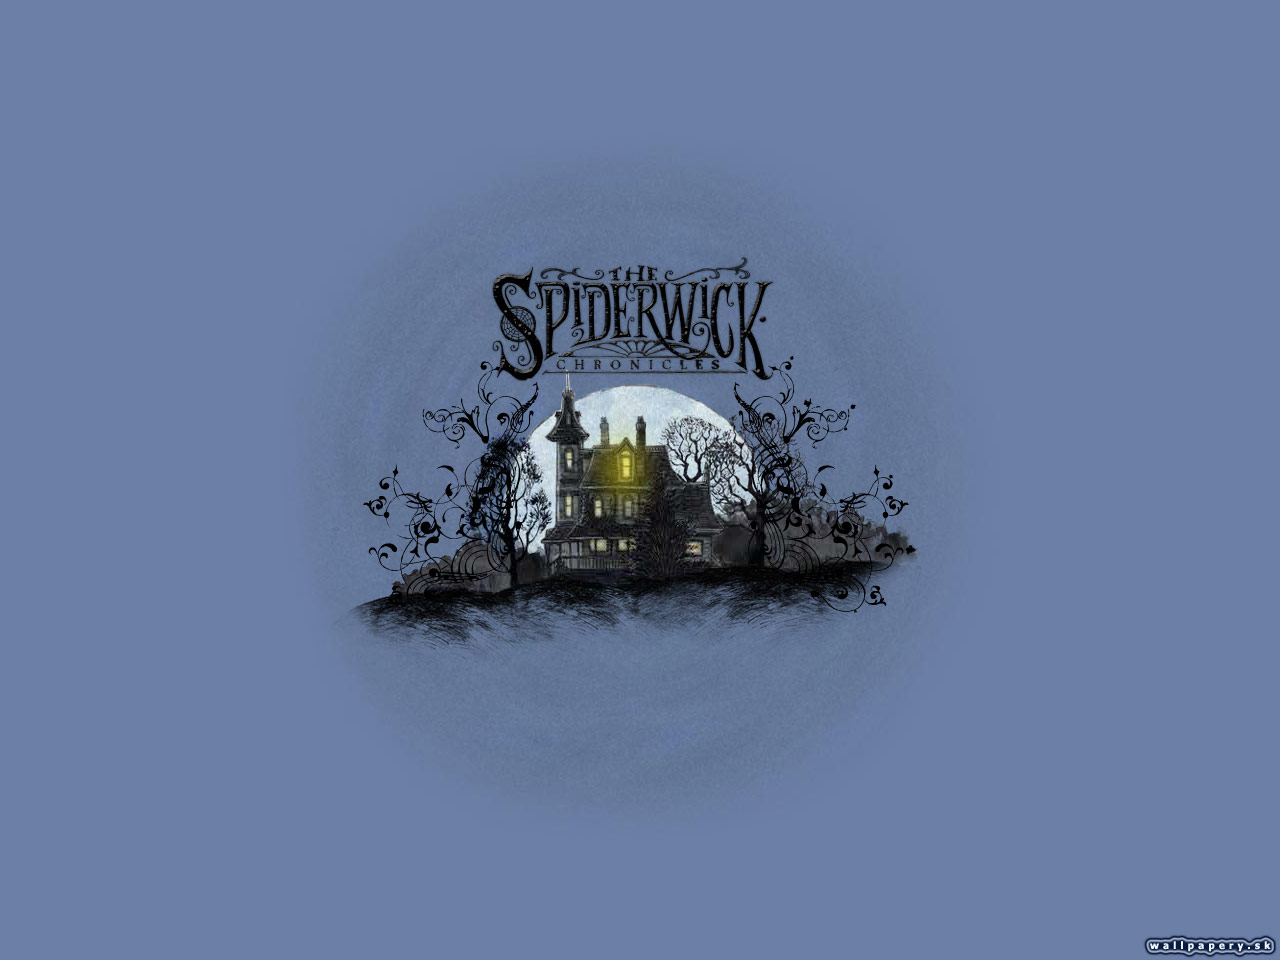 The Spiderwick Chronicles - wallpaper 3